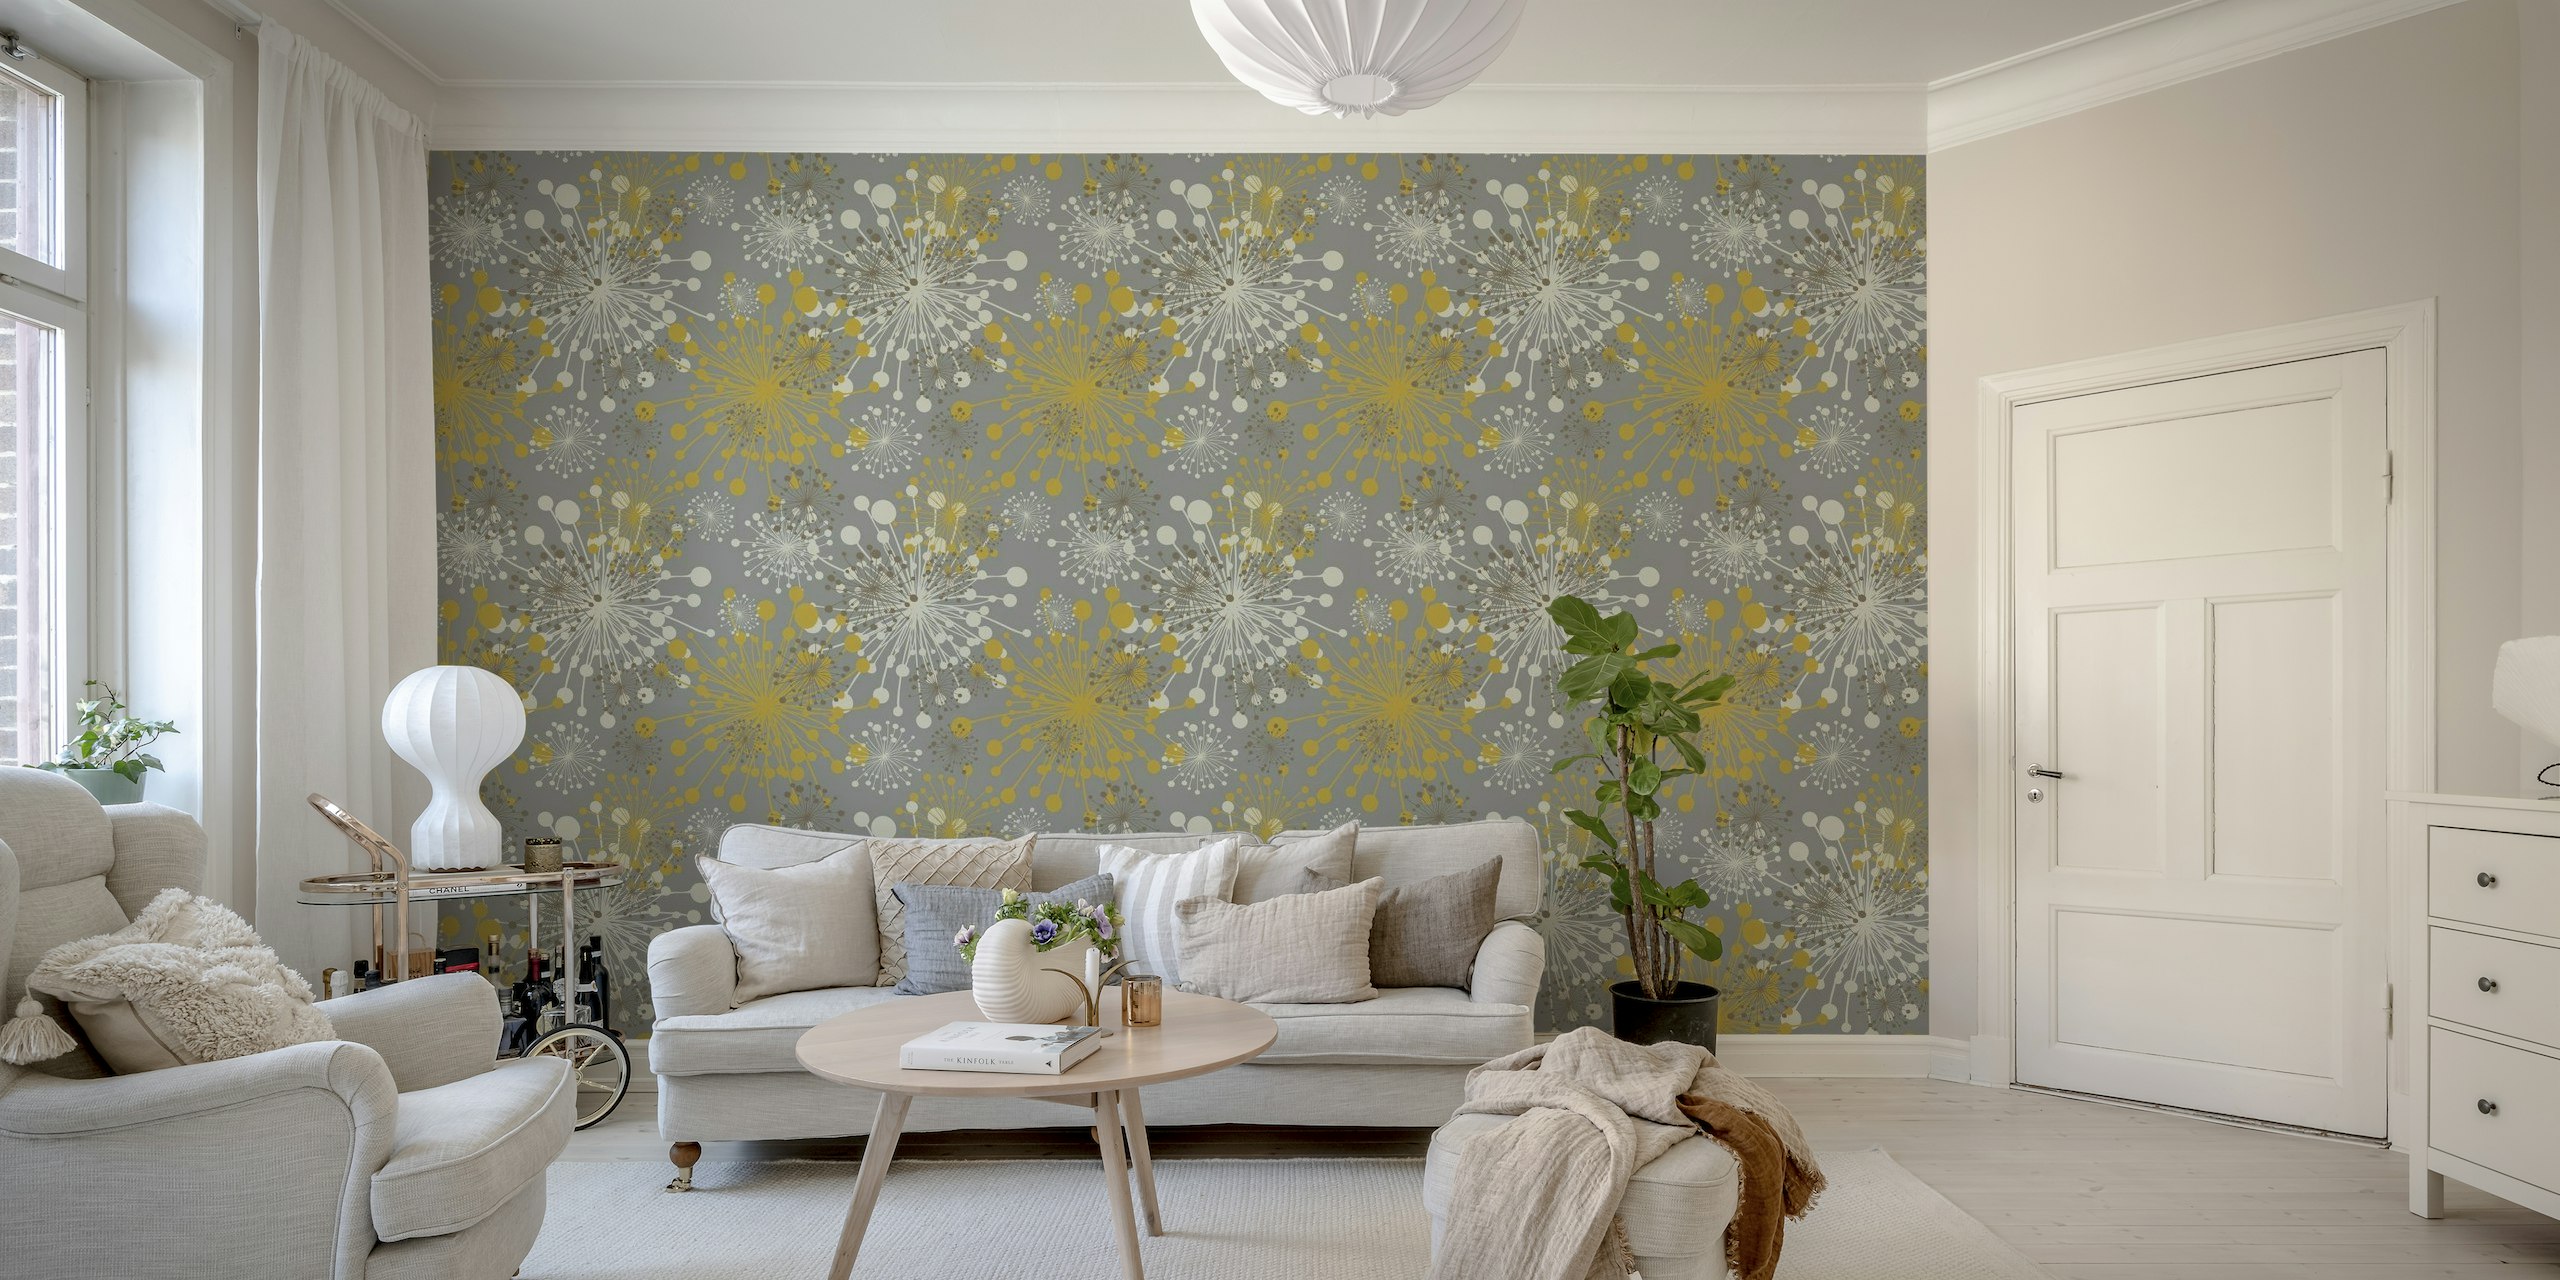 Stylish dandelions pattern wall mural in grey and mustard colors